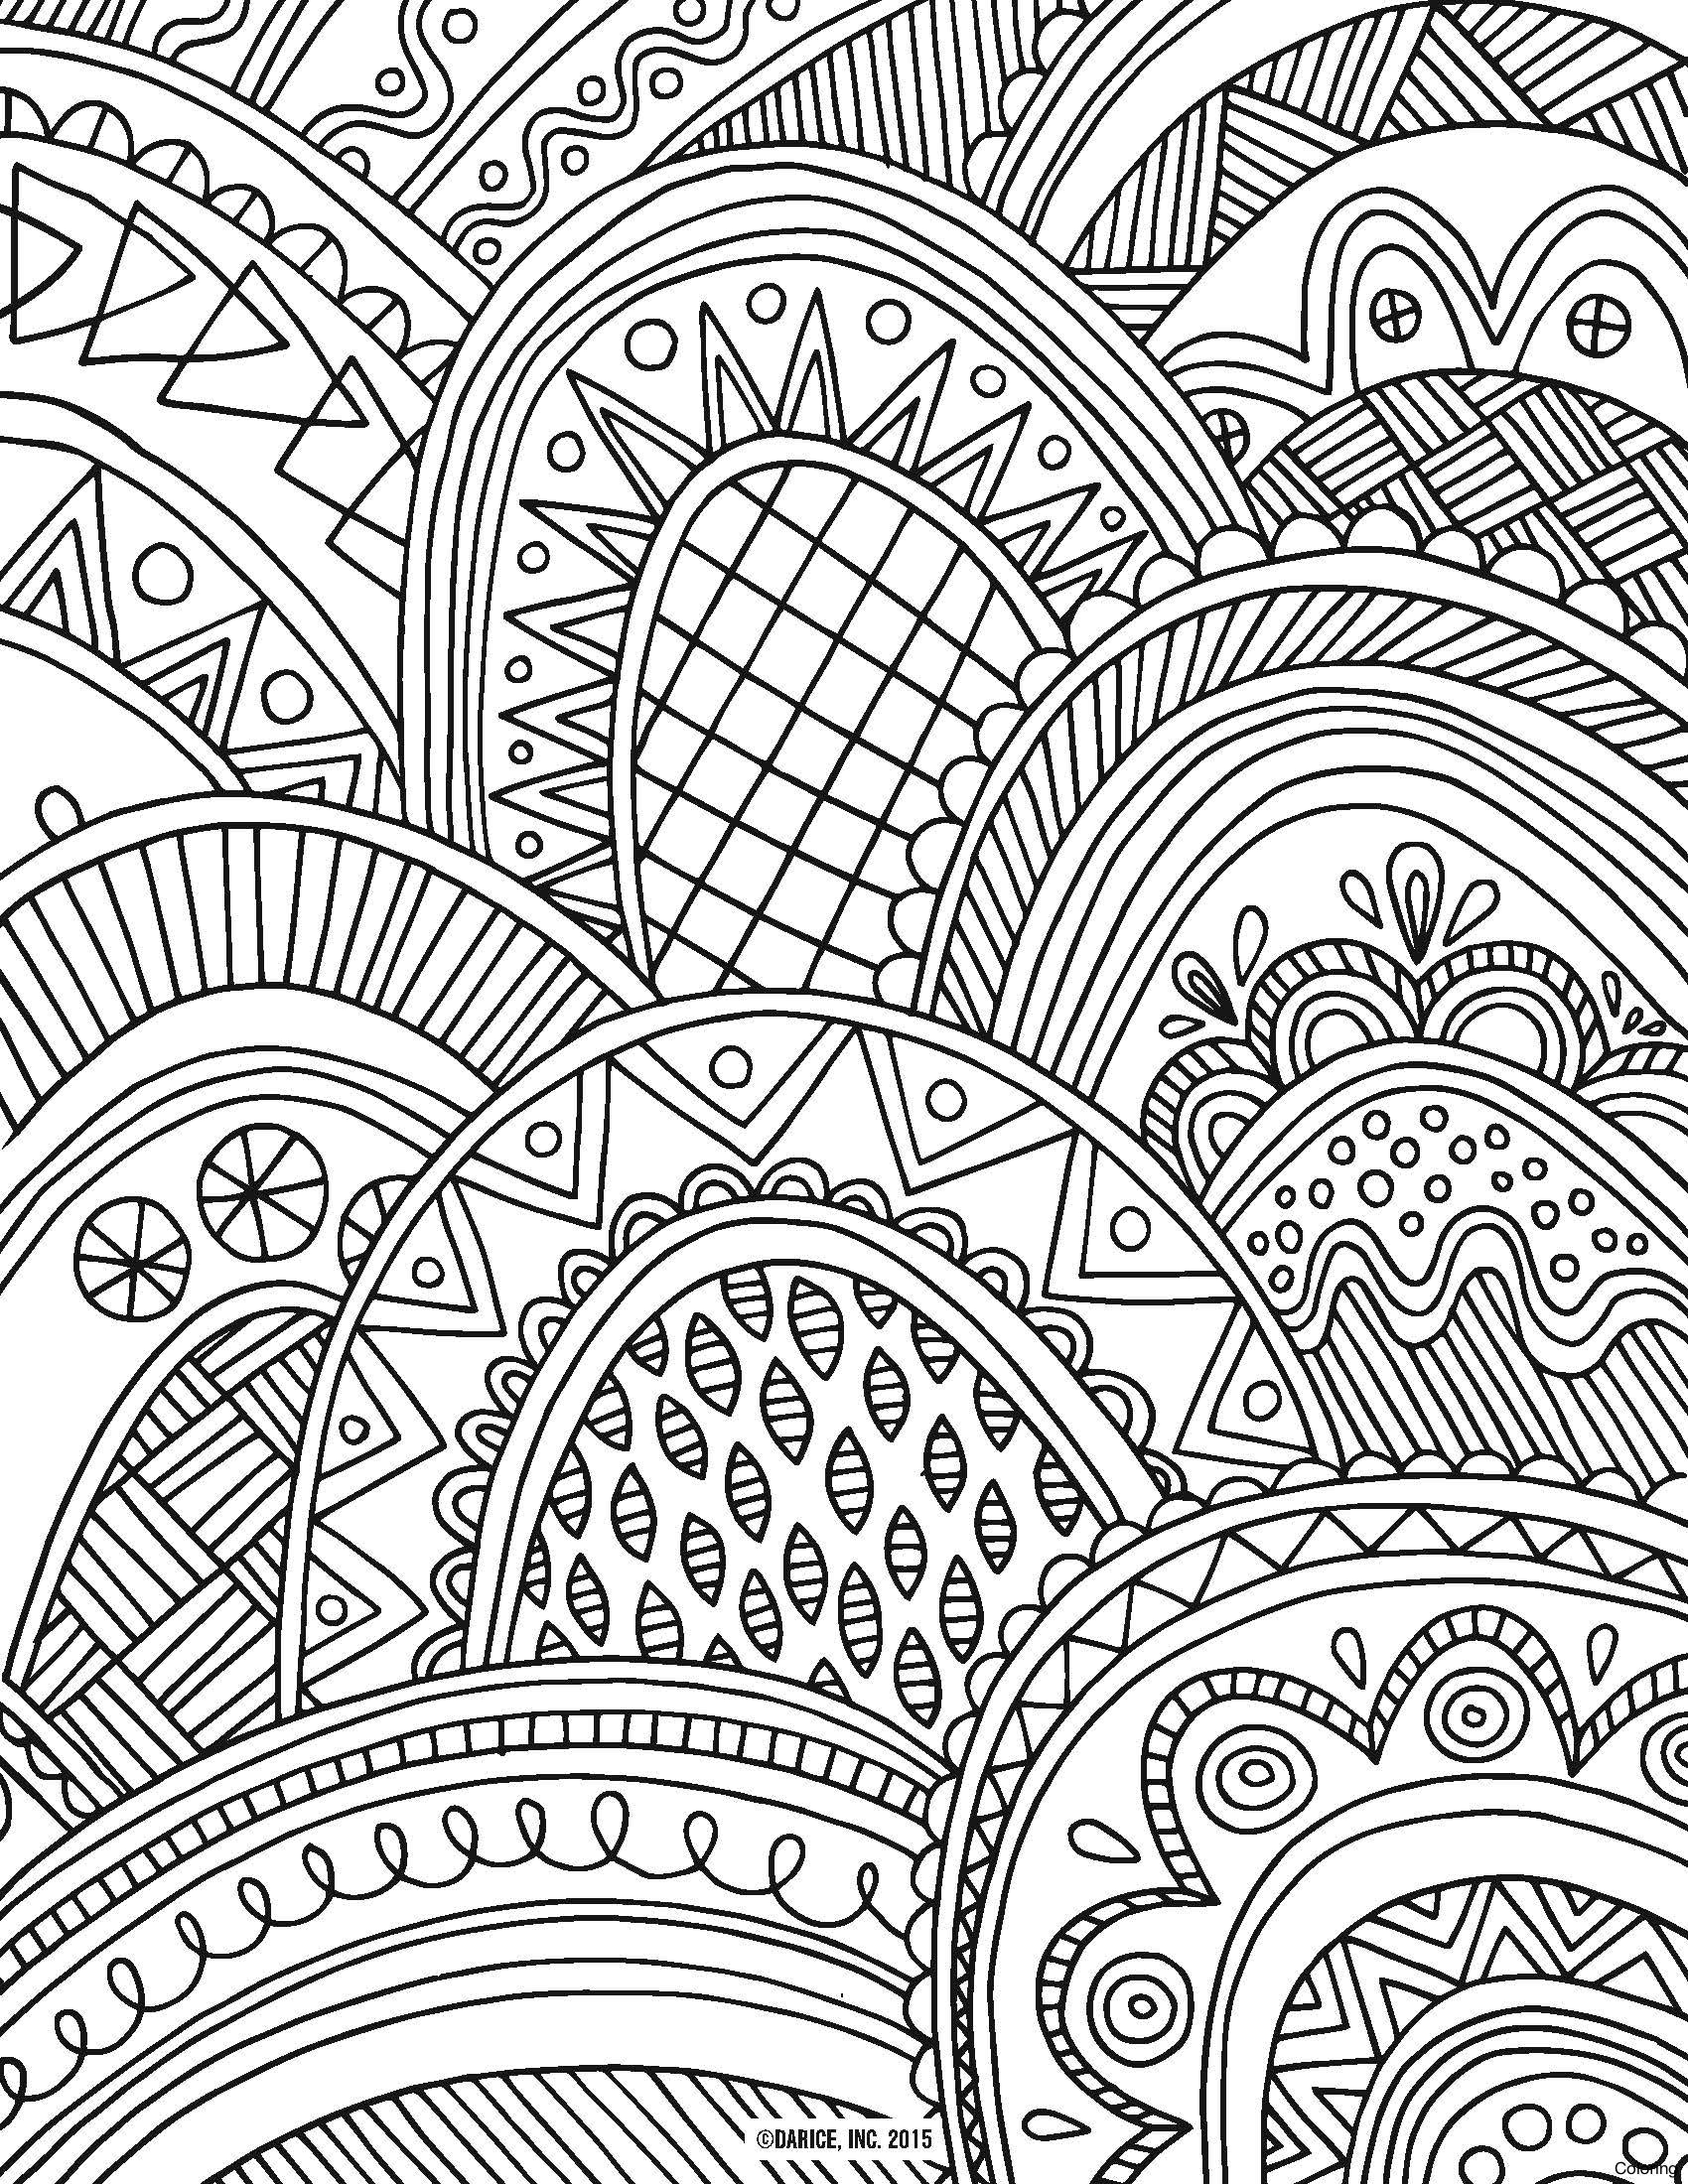 Coloring Pages For Adults Easter Coloring Ideas Easter Adult Coloring Pages Ideas At Getdrawings